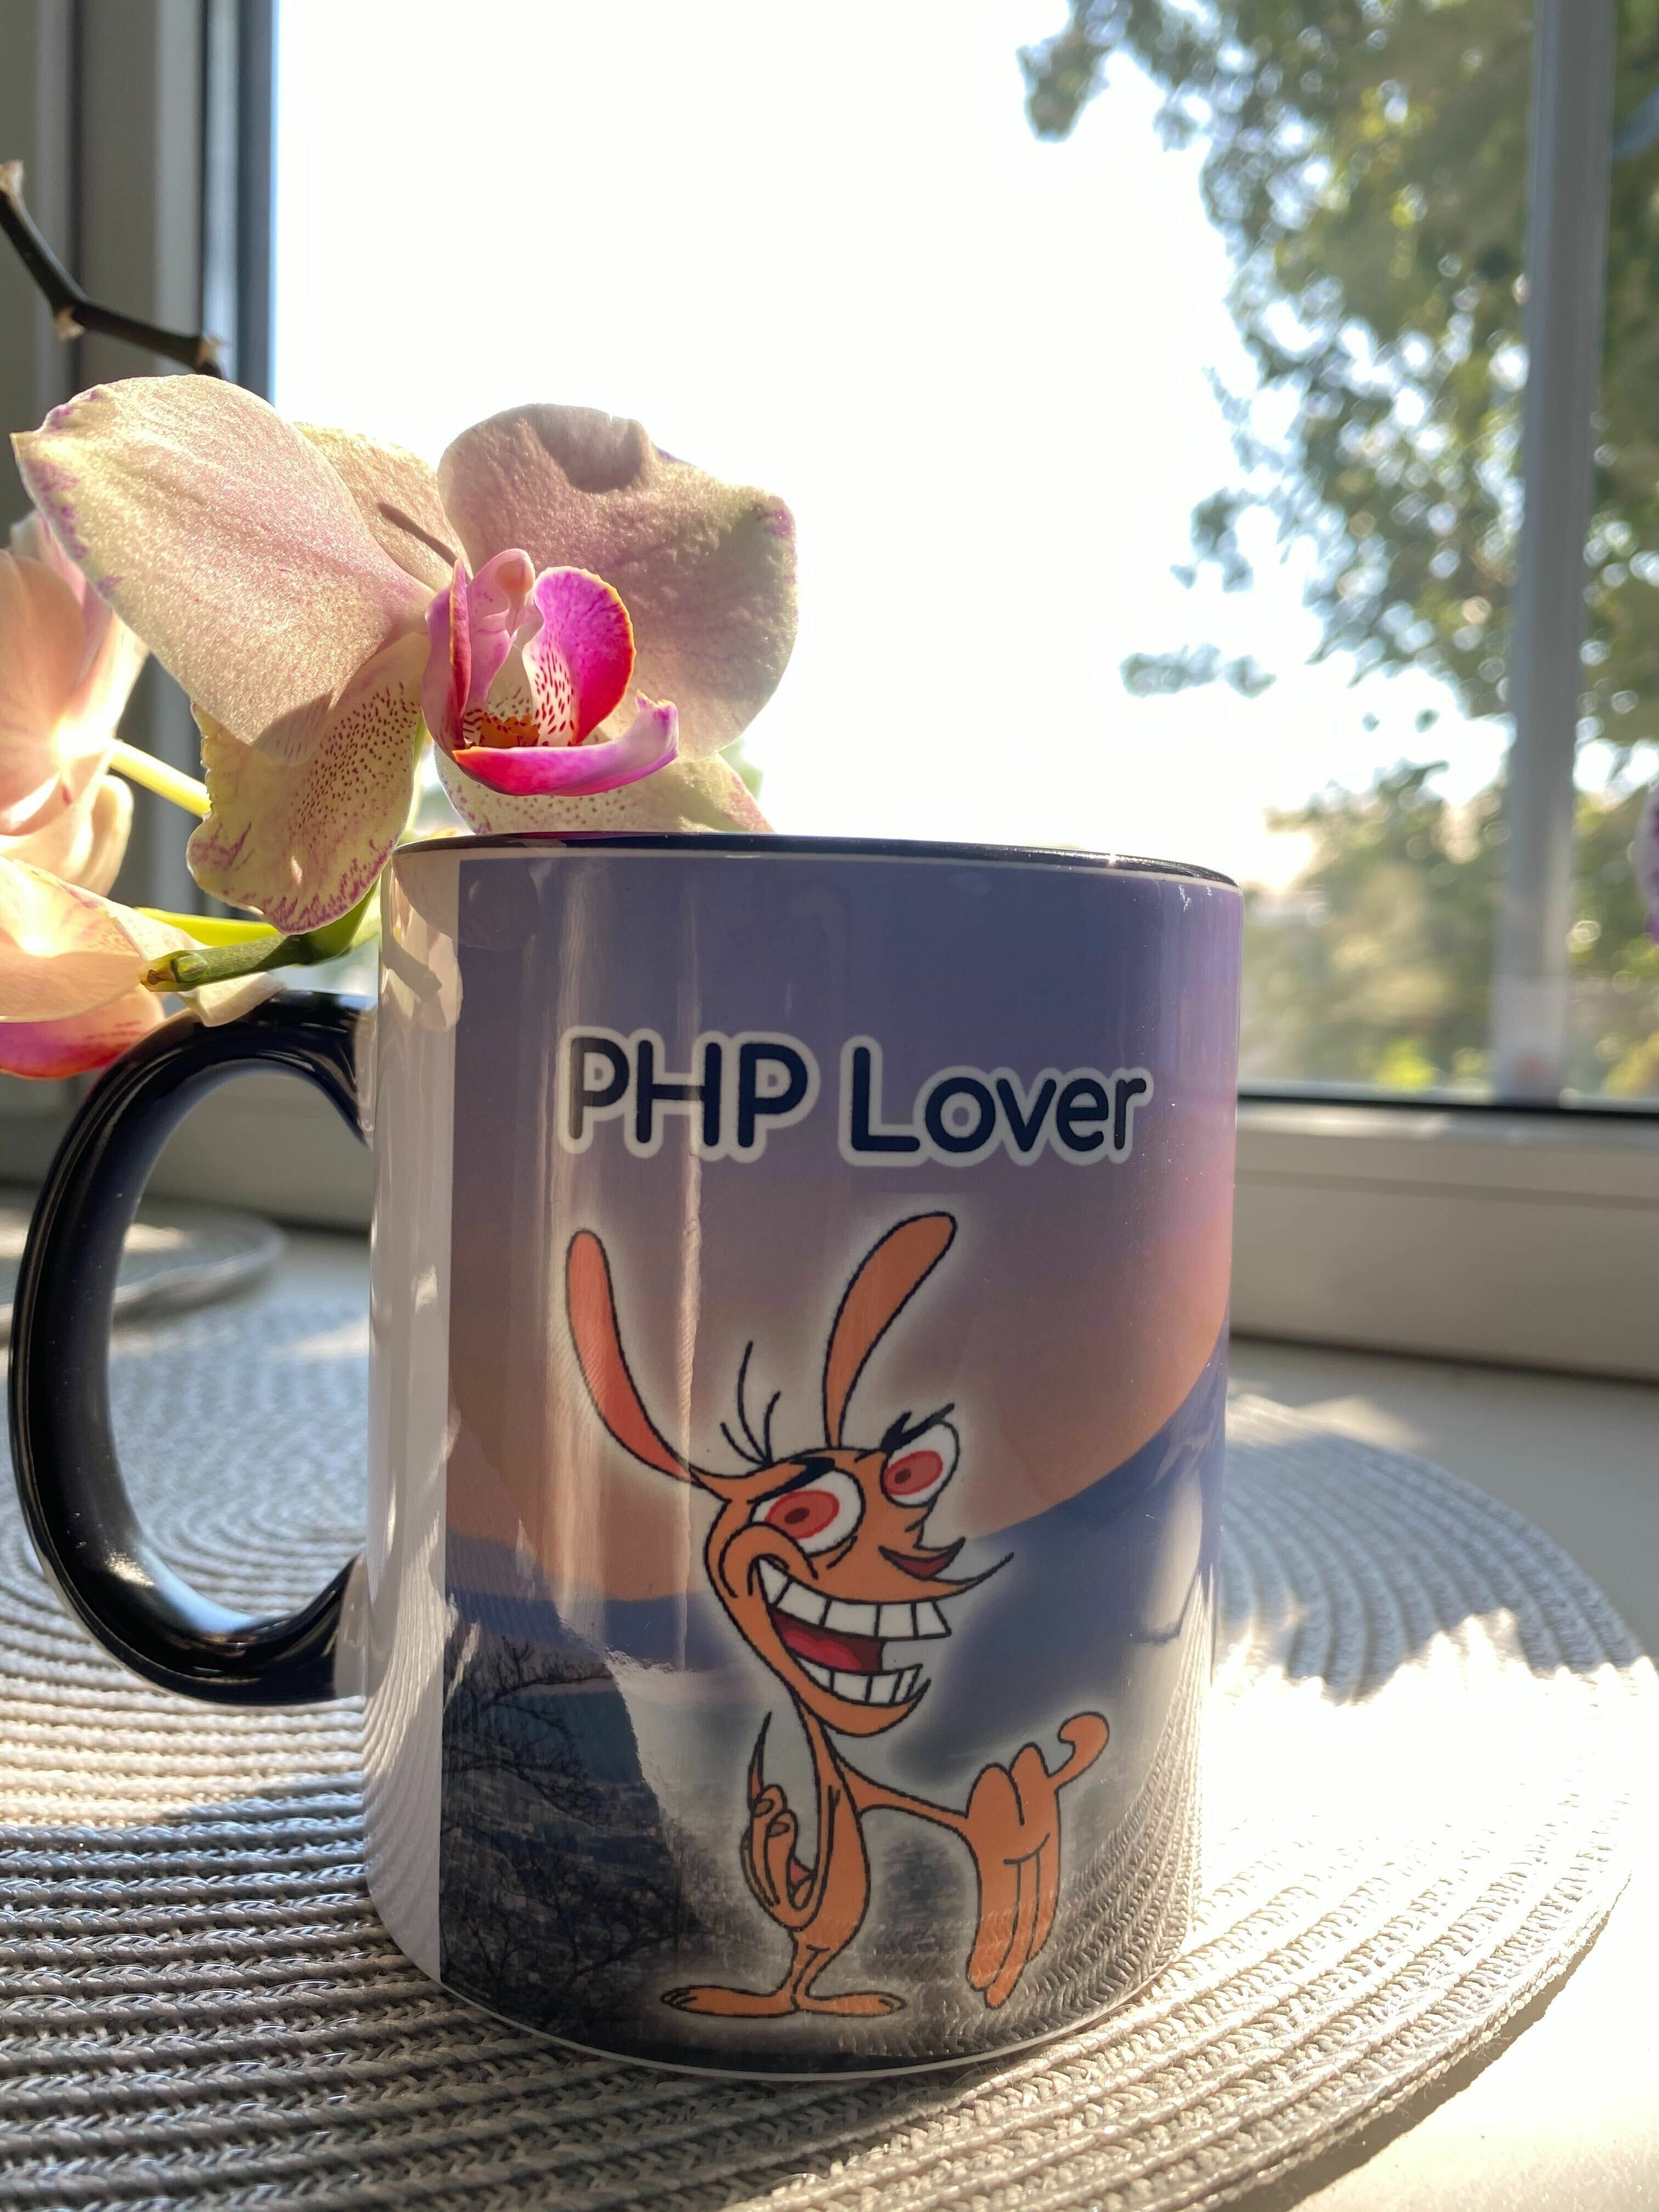 PHP Lover